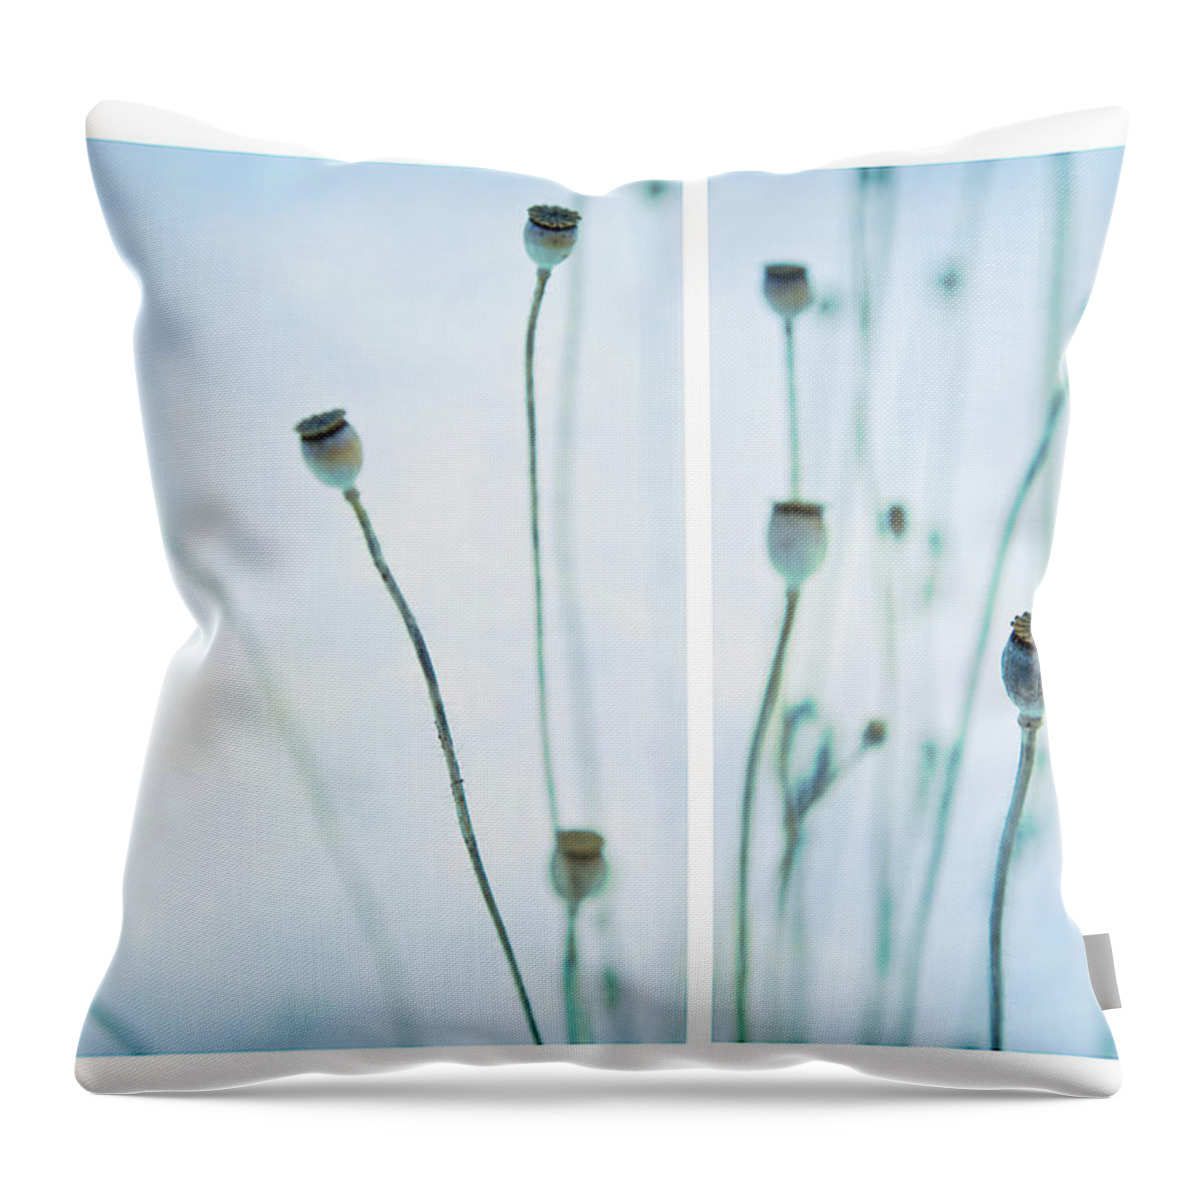 Seeds Throw Pillow featuring the photograph Poppy Seed Pods by Theresa Tahara